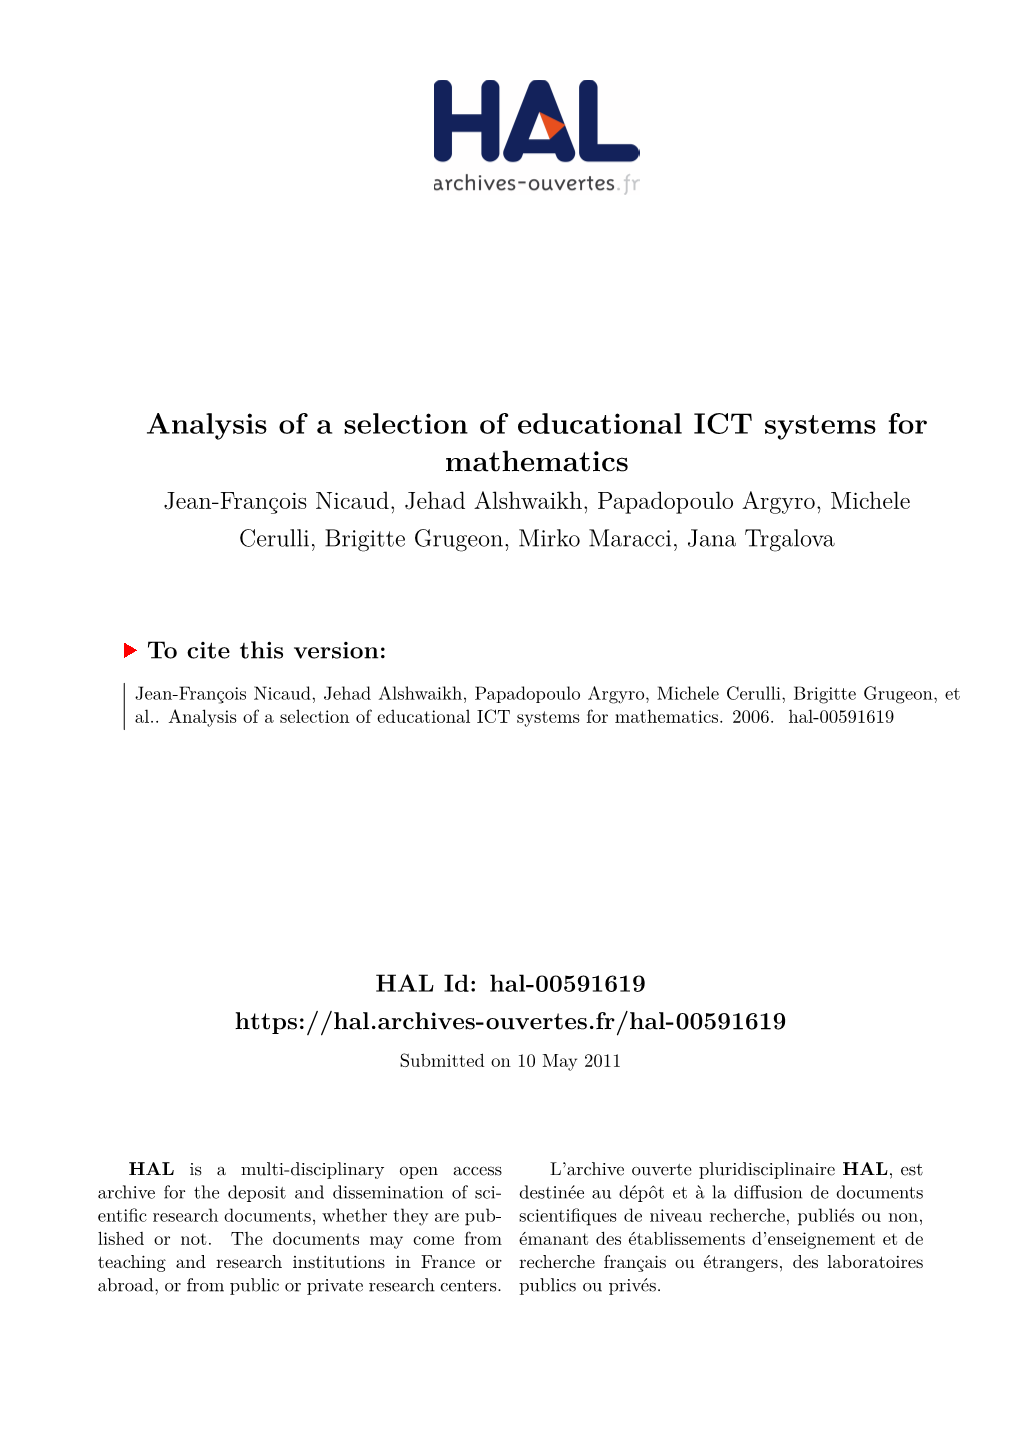 Analysis of a Selection of Educational ICT Systems